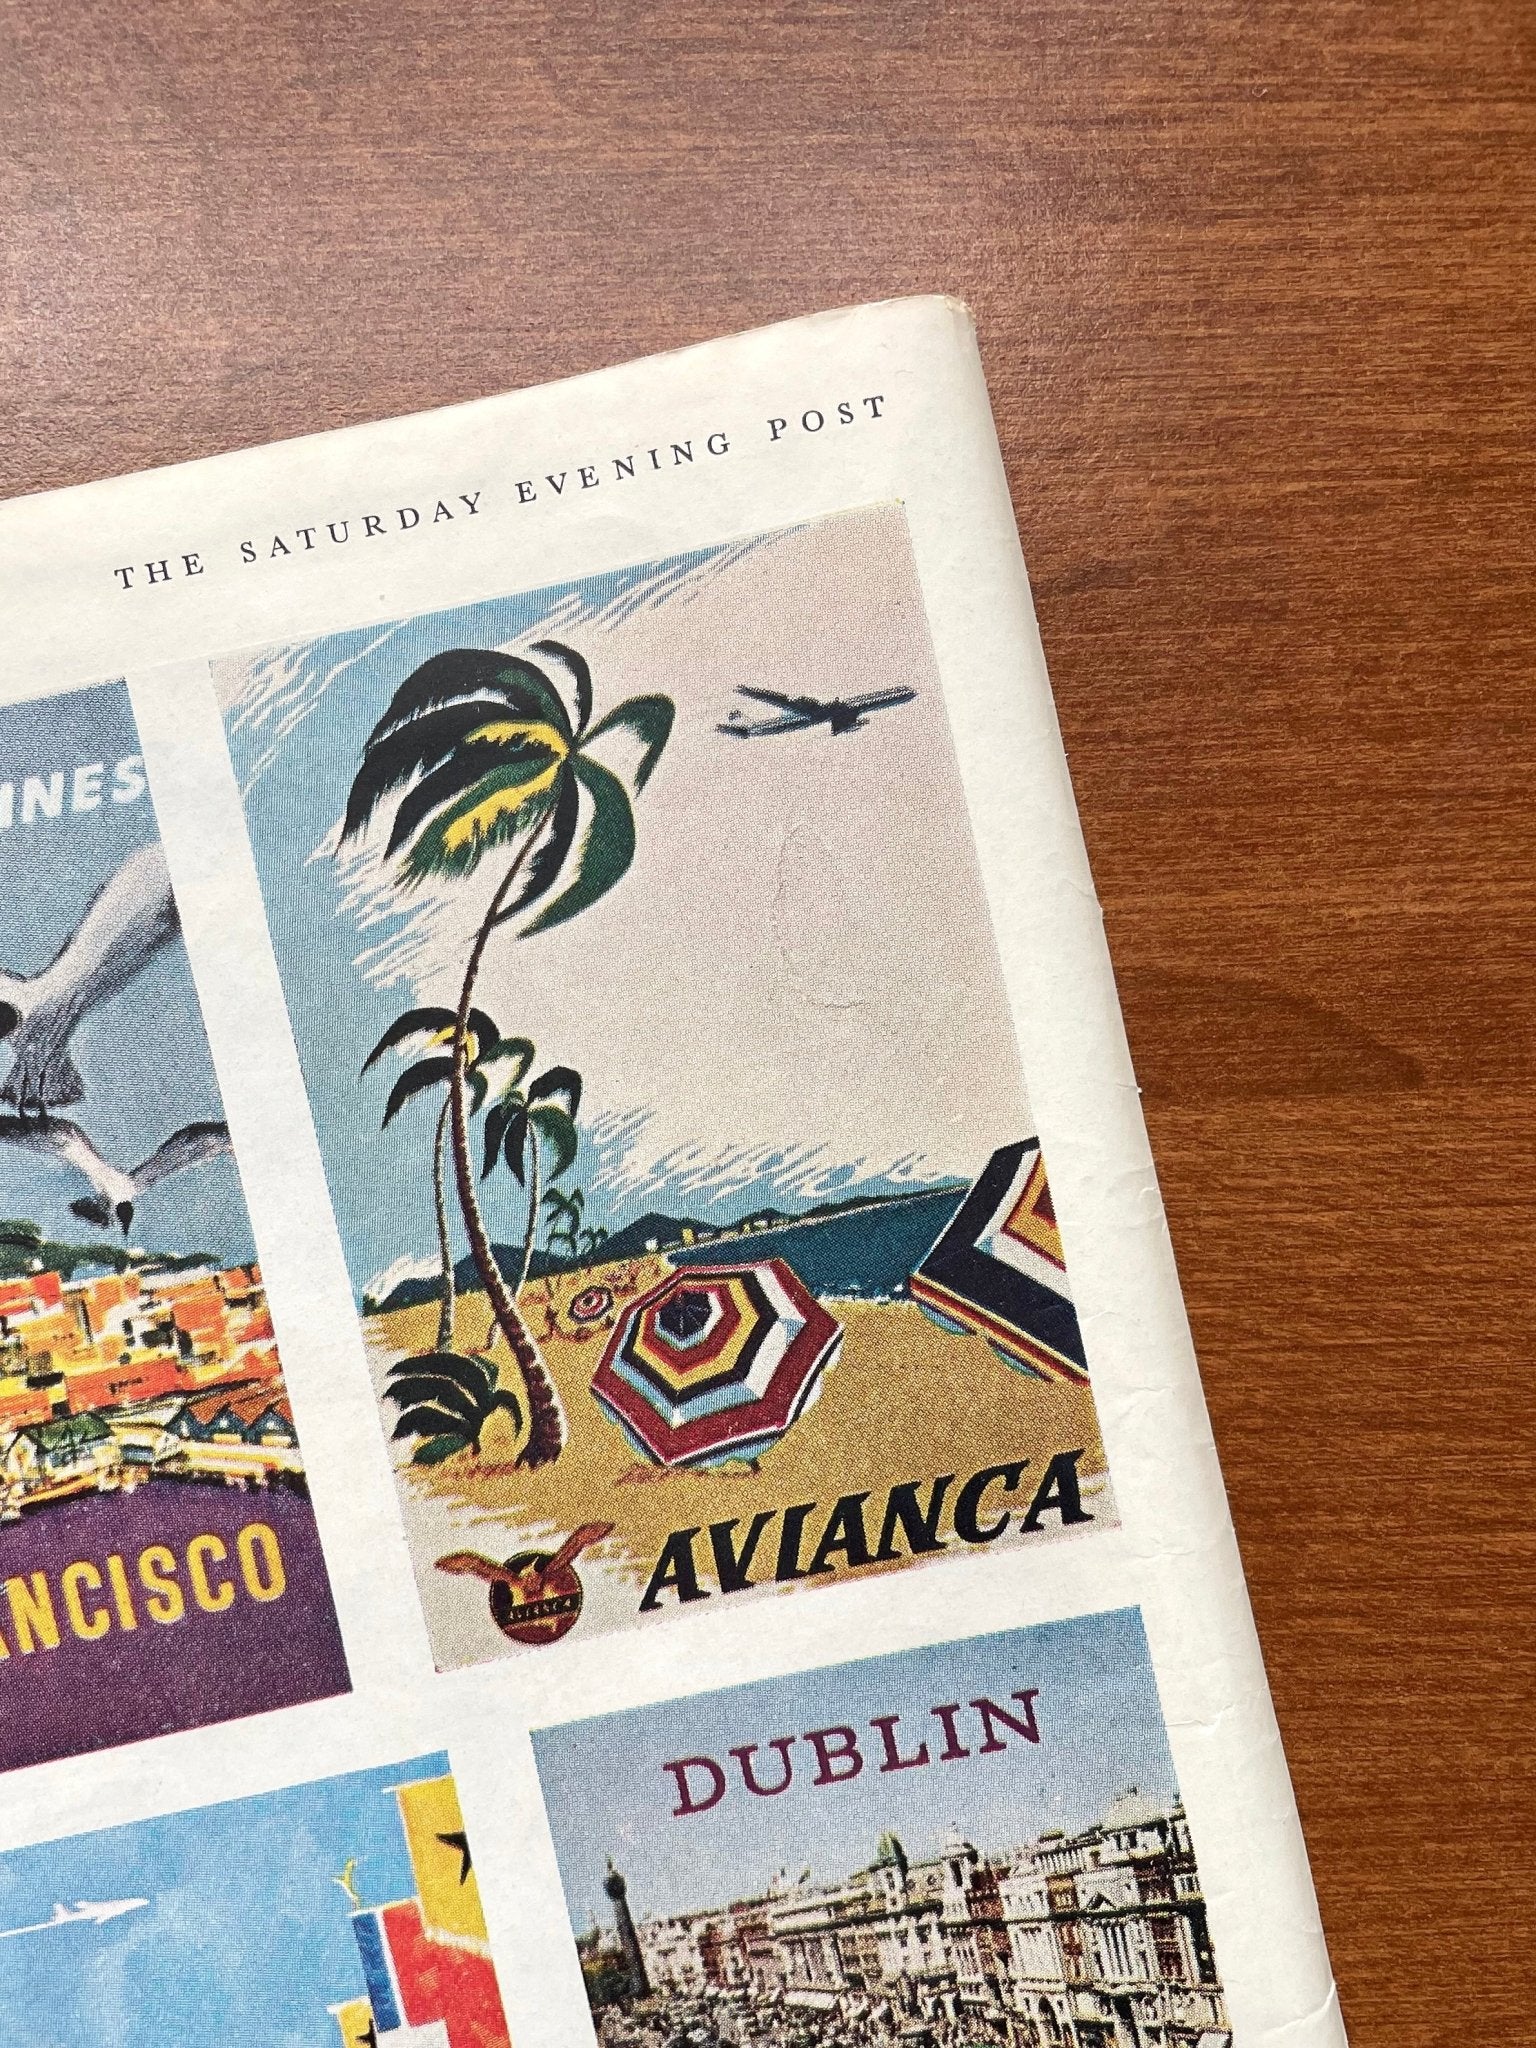 1961 Boeing Jetliners with 22 Vintage Travel Posters Advertisement